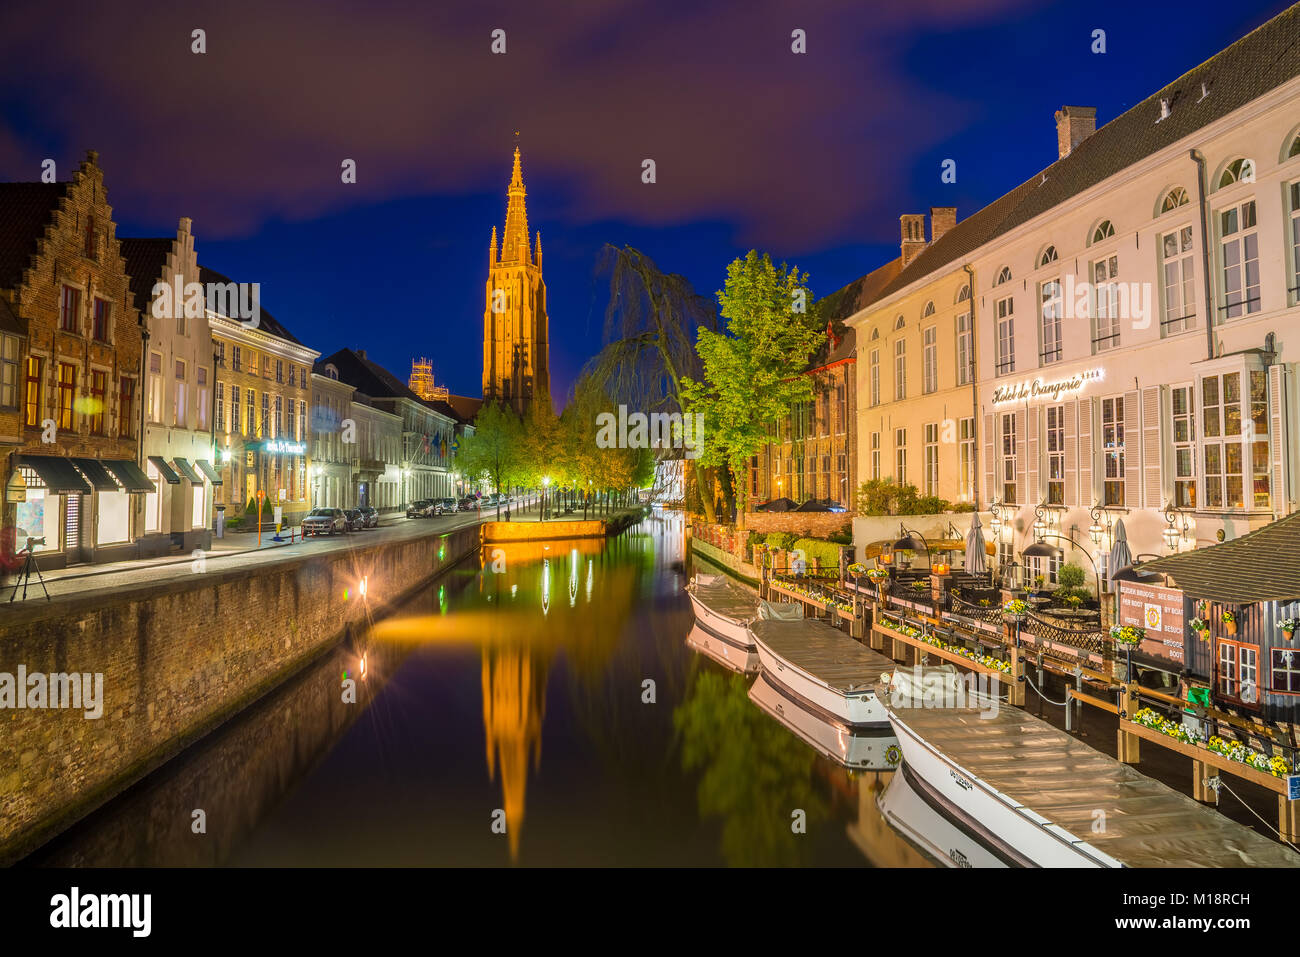 Bruges, Belgium - April 17, 2017: Dijver Canal and the Our Lady Church of Bruges, Belgium. Stock Photo